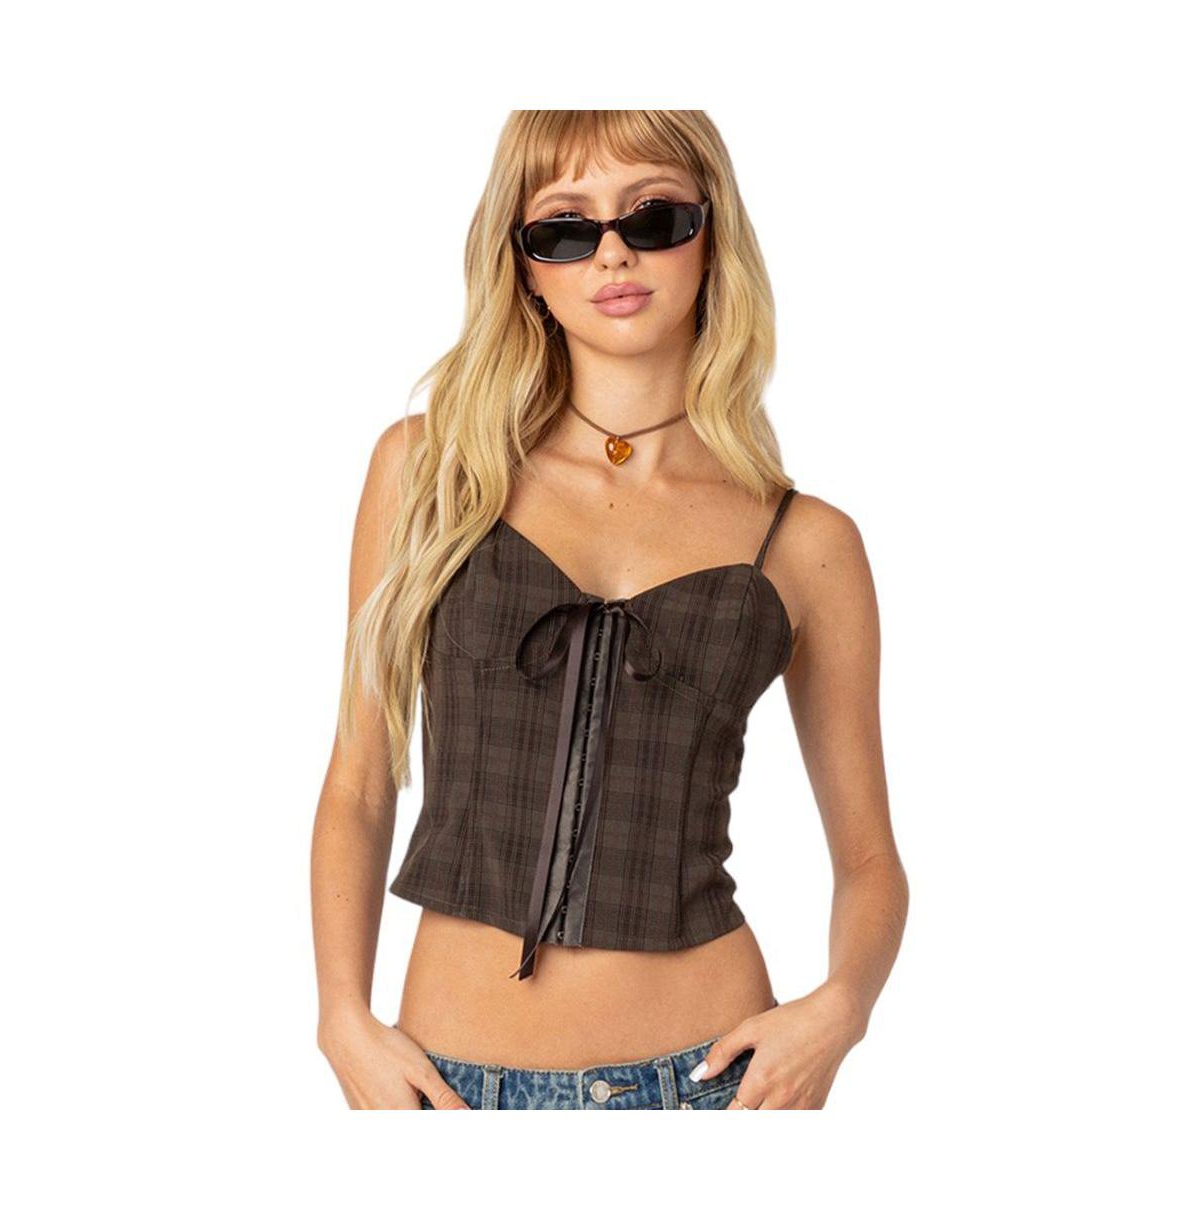 Edikted Women's Plaid Lace Up Corset Top - Brown overflow